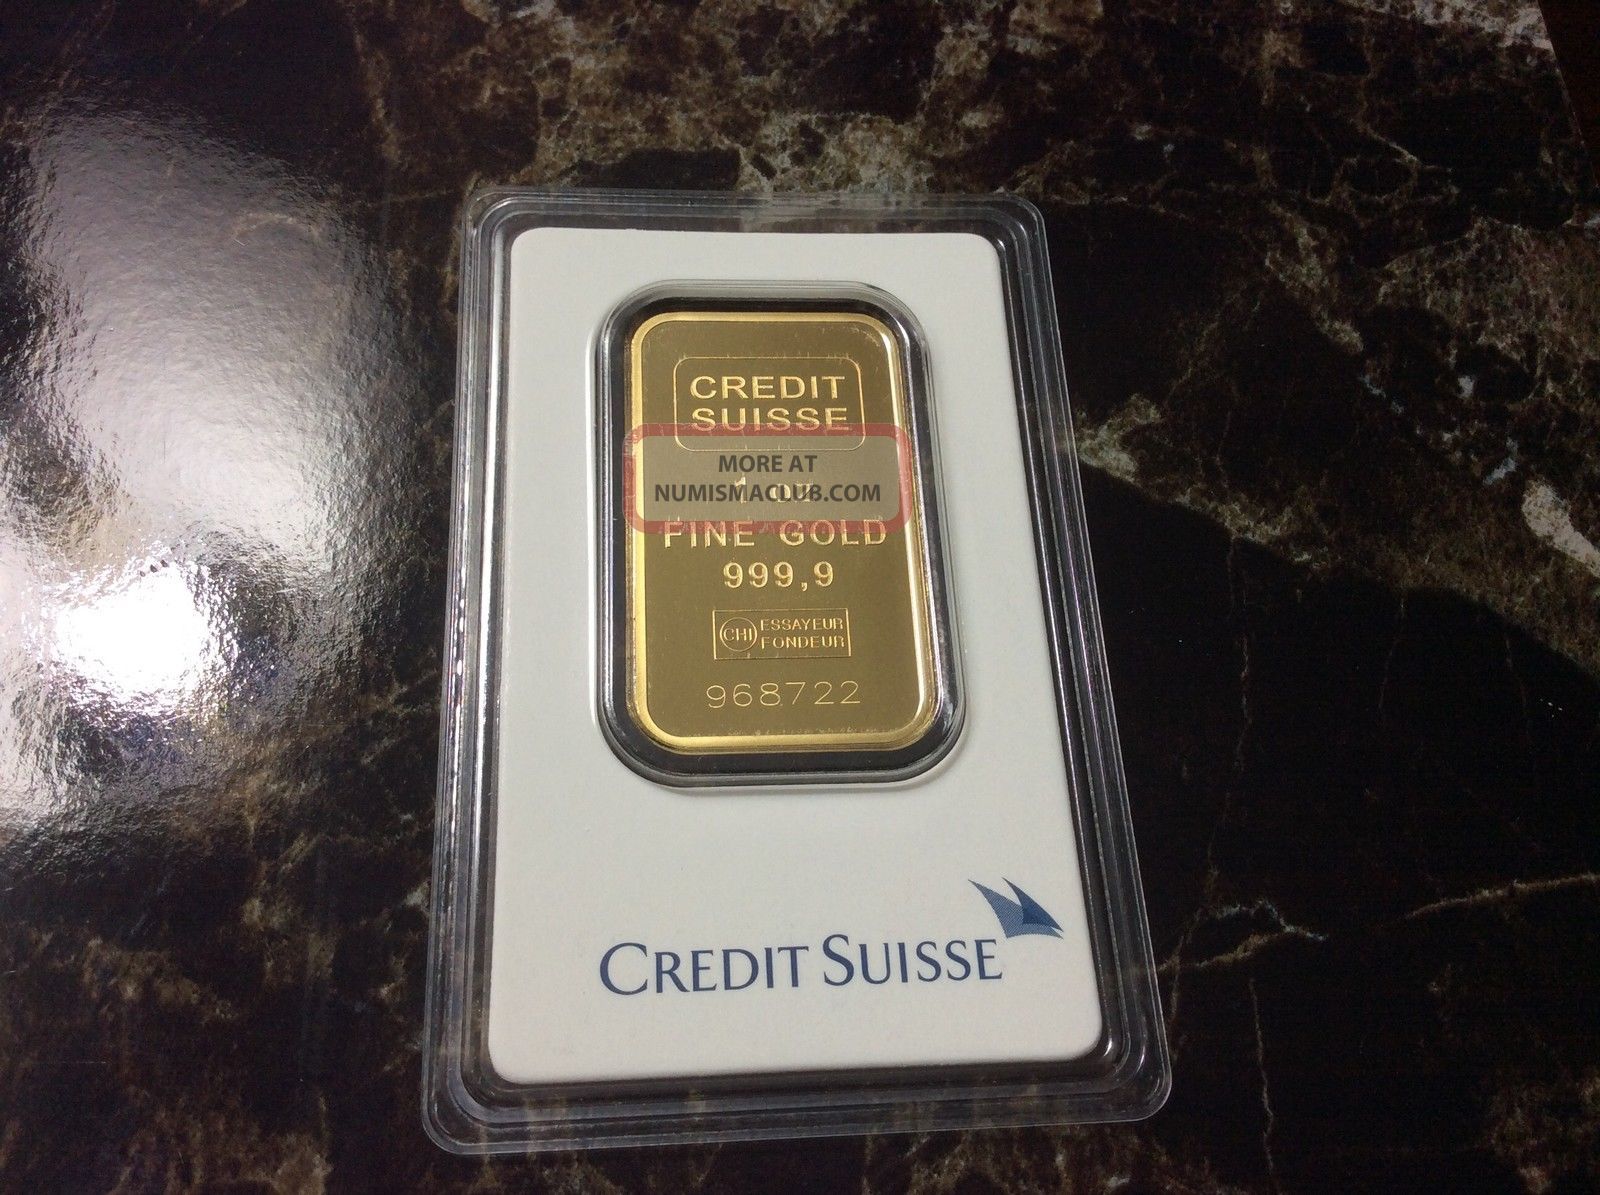 credit suisse gold bar 1 ounce